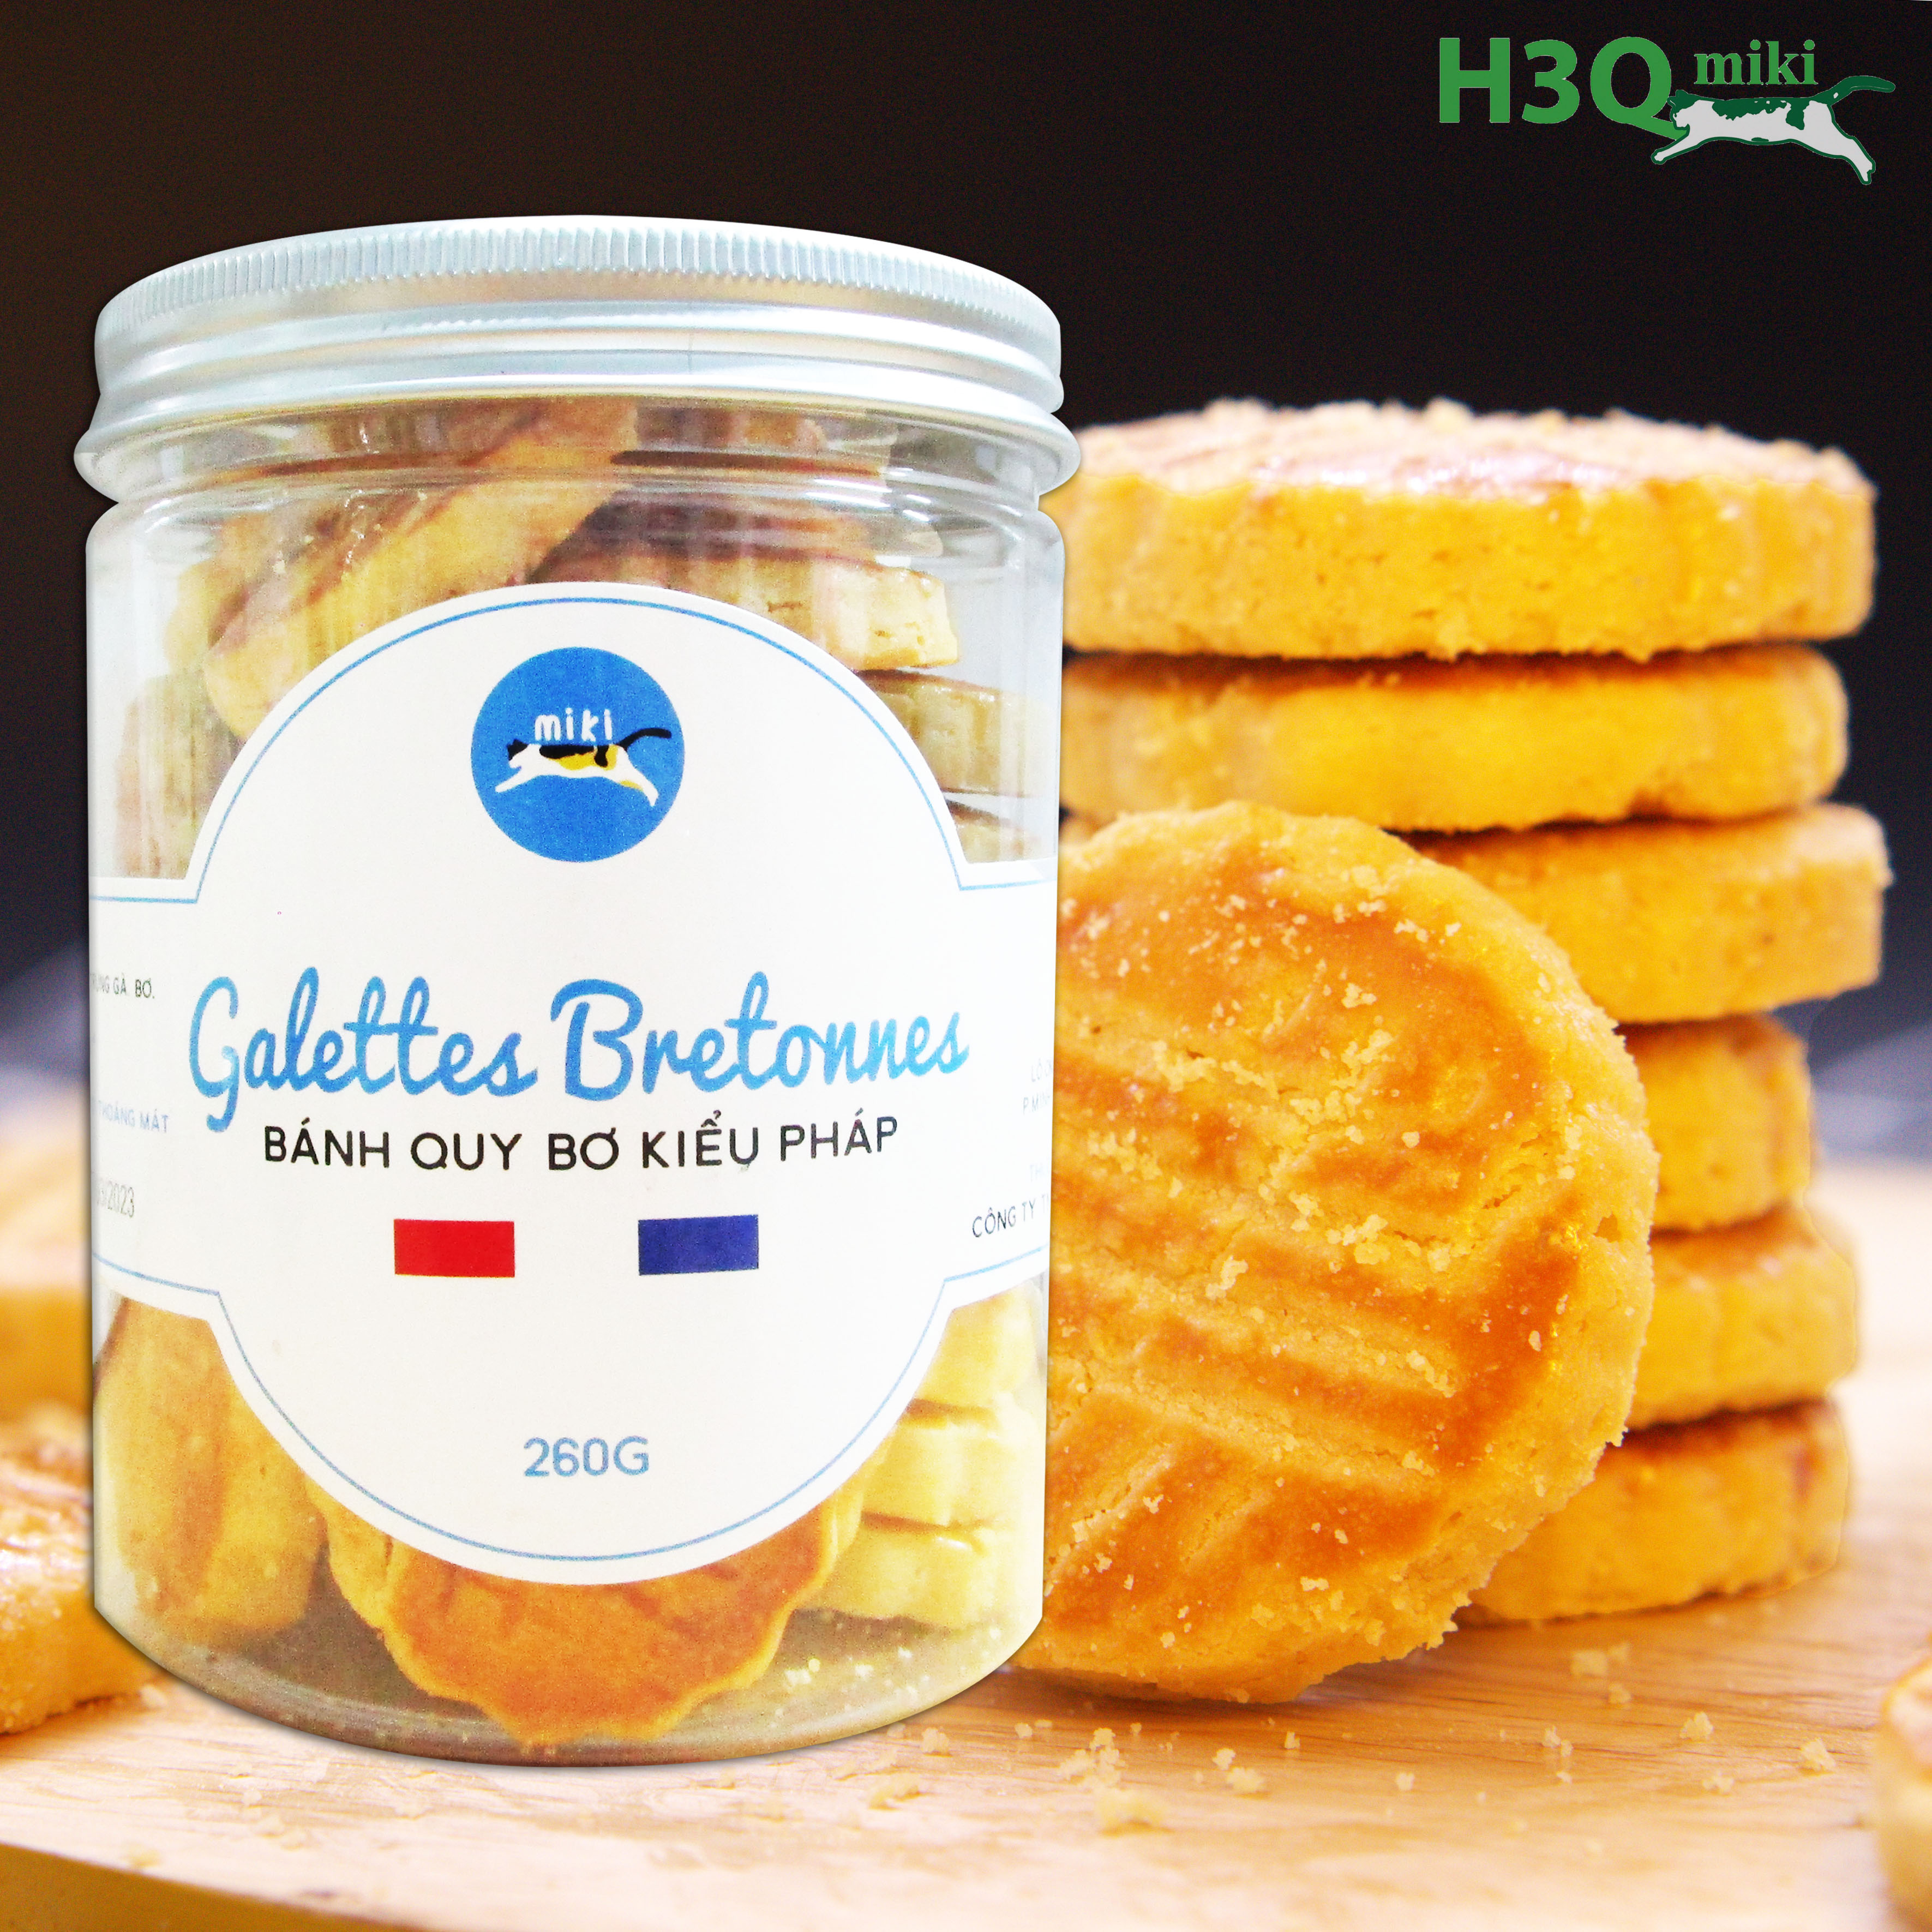 H3Q Miki Mildly Salty French Butter Cookies From New Zealand Dairy 260g Jar